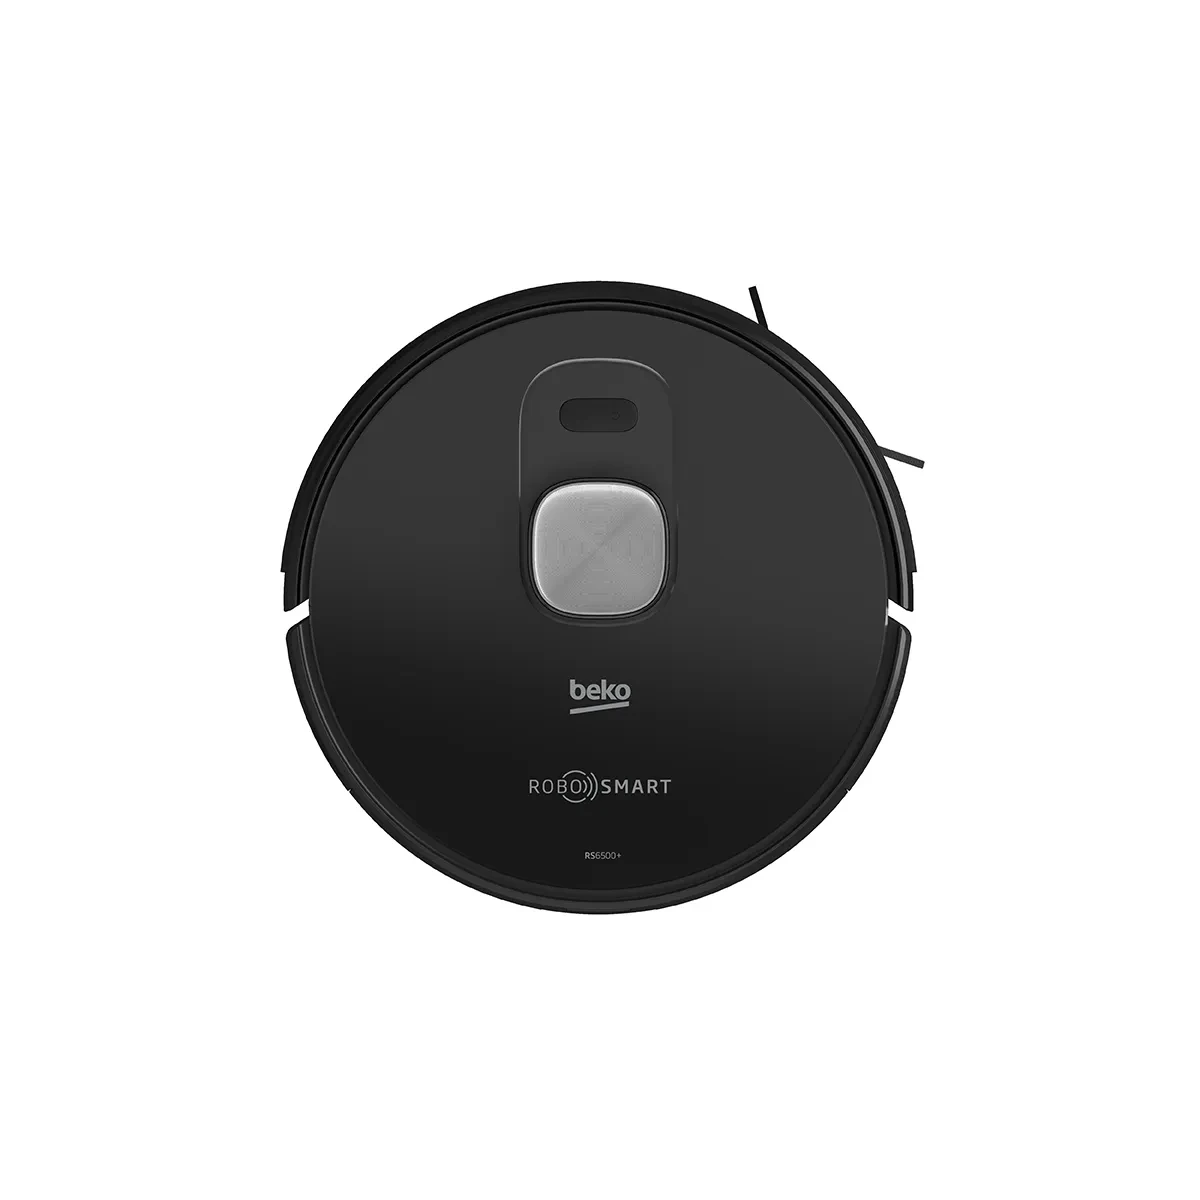 Beko Robot Vacuum Cleaner - Up to 5000 pa suction power -  LDS Navigation - 4L Automatic Dust station  - 400ml dust capacity